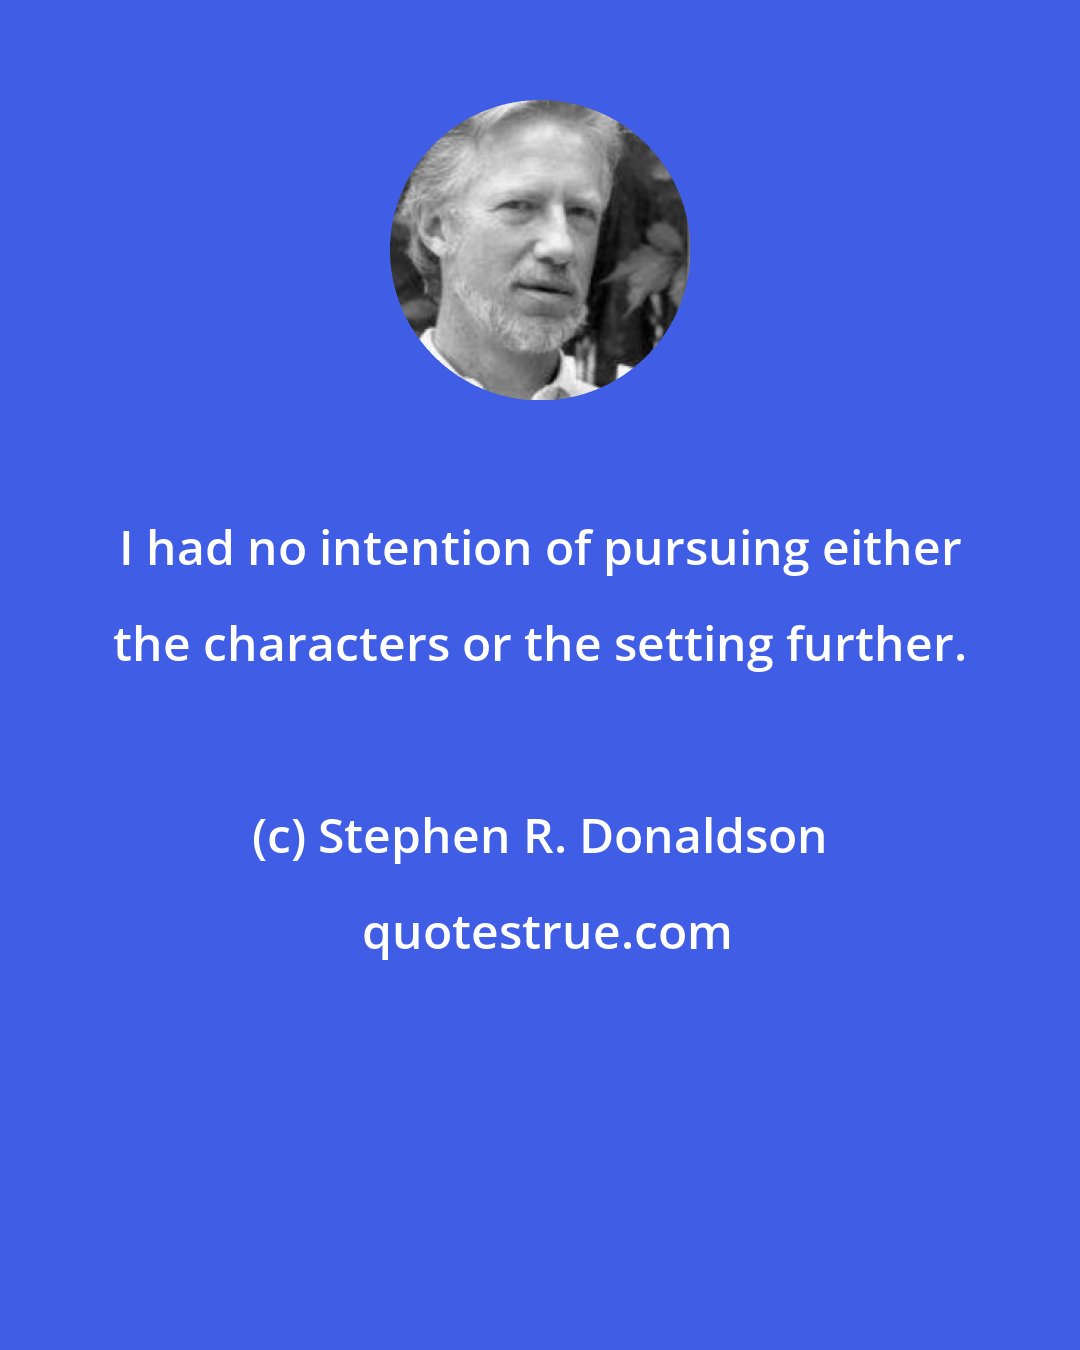 Stephen R. Donaldson: I had no intention of pursuing either the characters or the setting further.